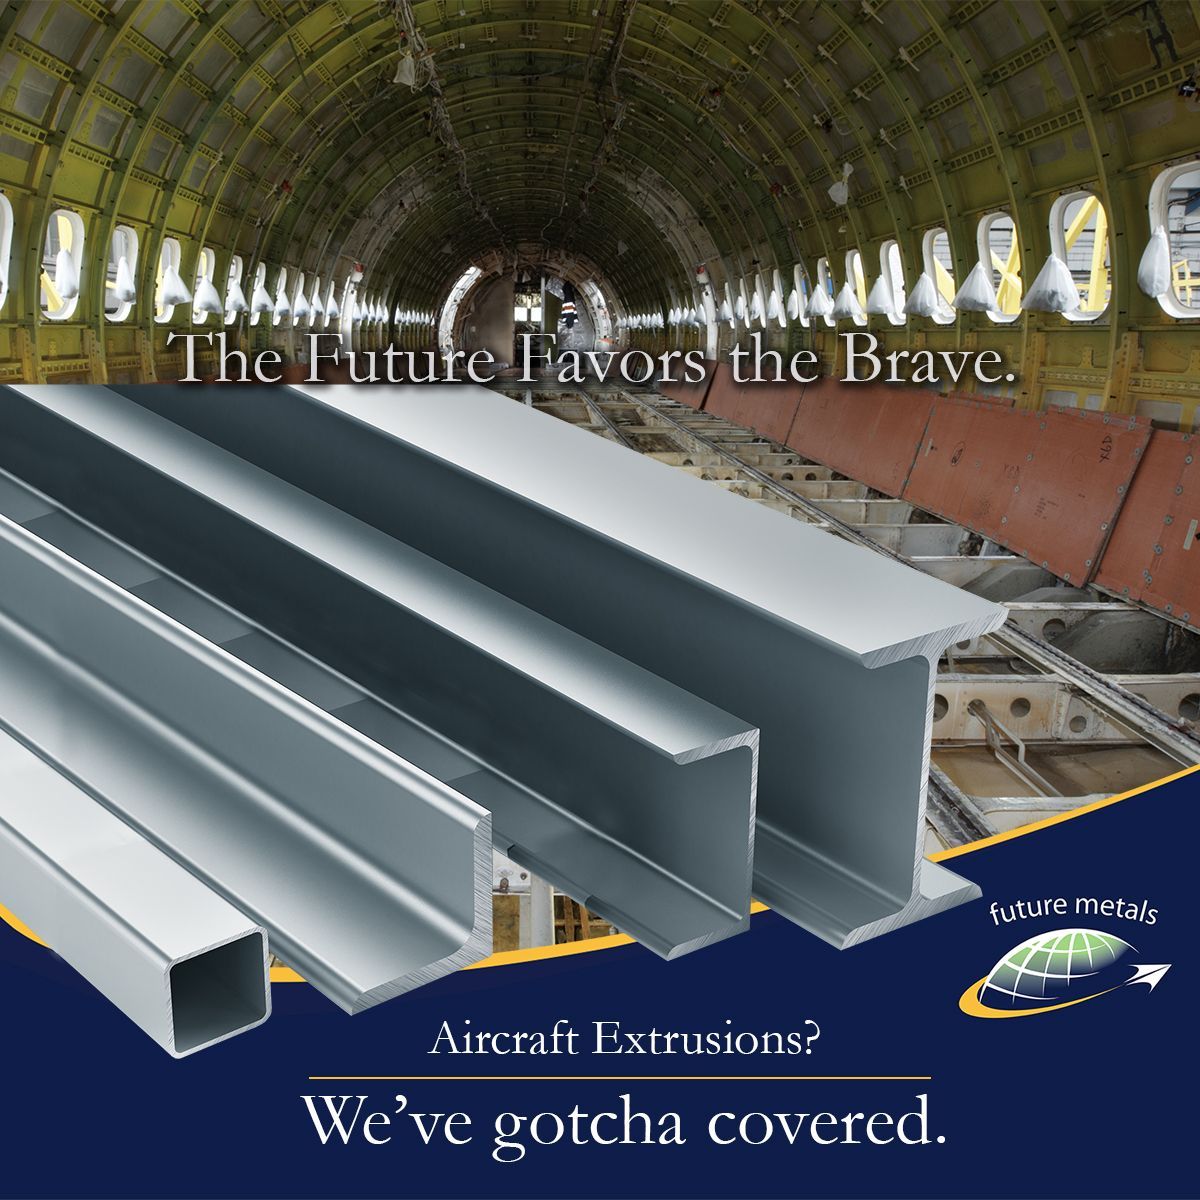 Extrusions, aircraft, aerospace, metal supplier, metals Elevate aviation excellence with Future Metals' aircraft-grade alloy extrusions. The future favors the brave in our aerospace metals warehouse.